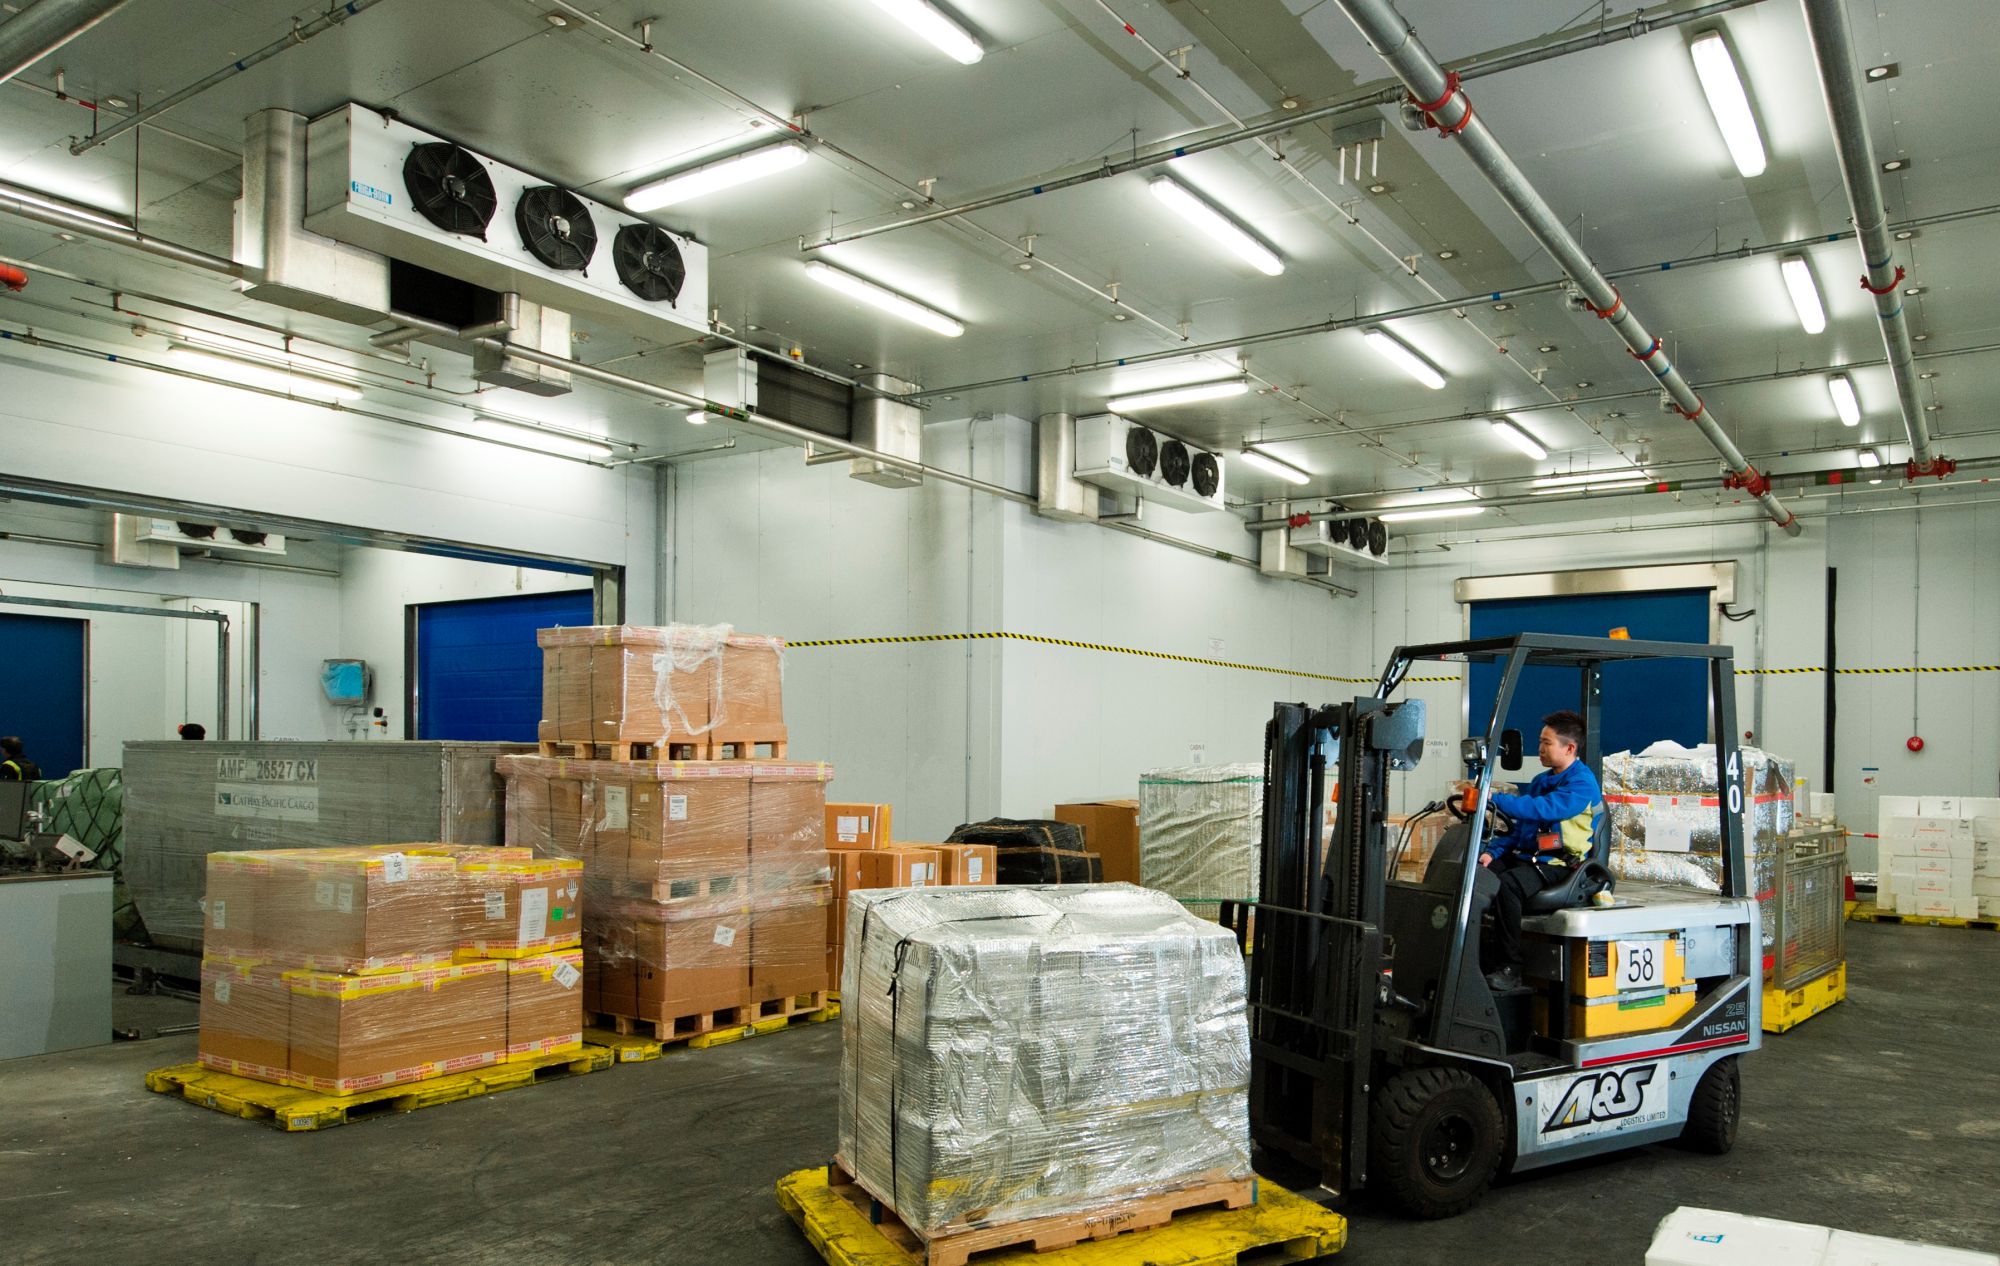 Cathay Pacific Cargo Terminal cold room for pharma shipments